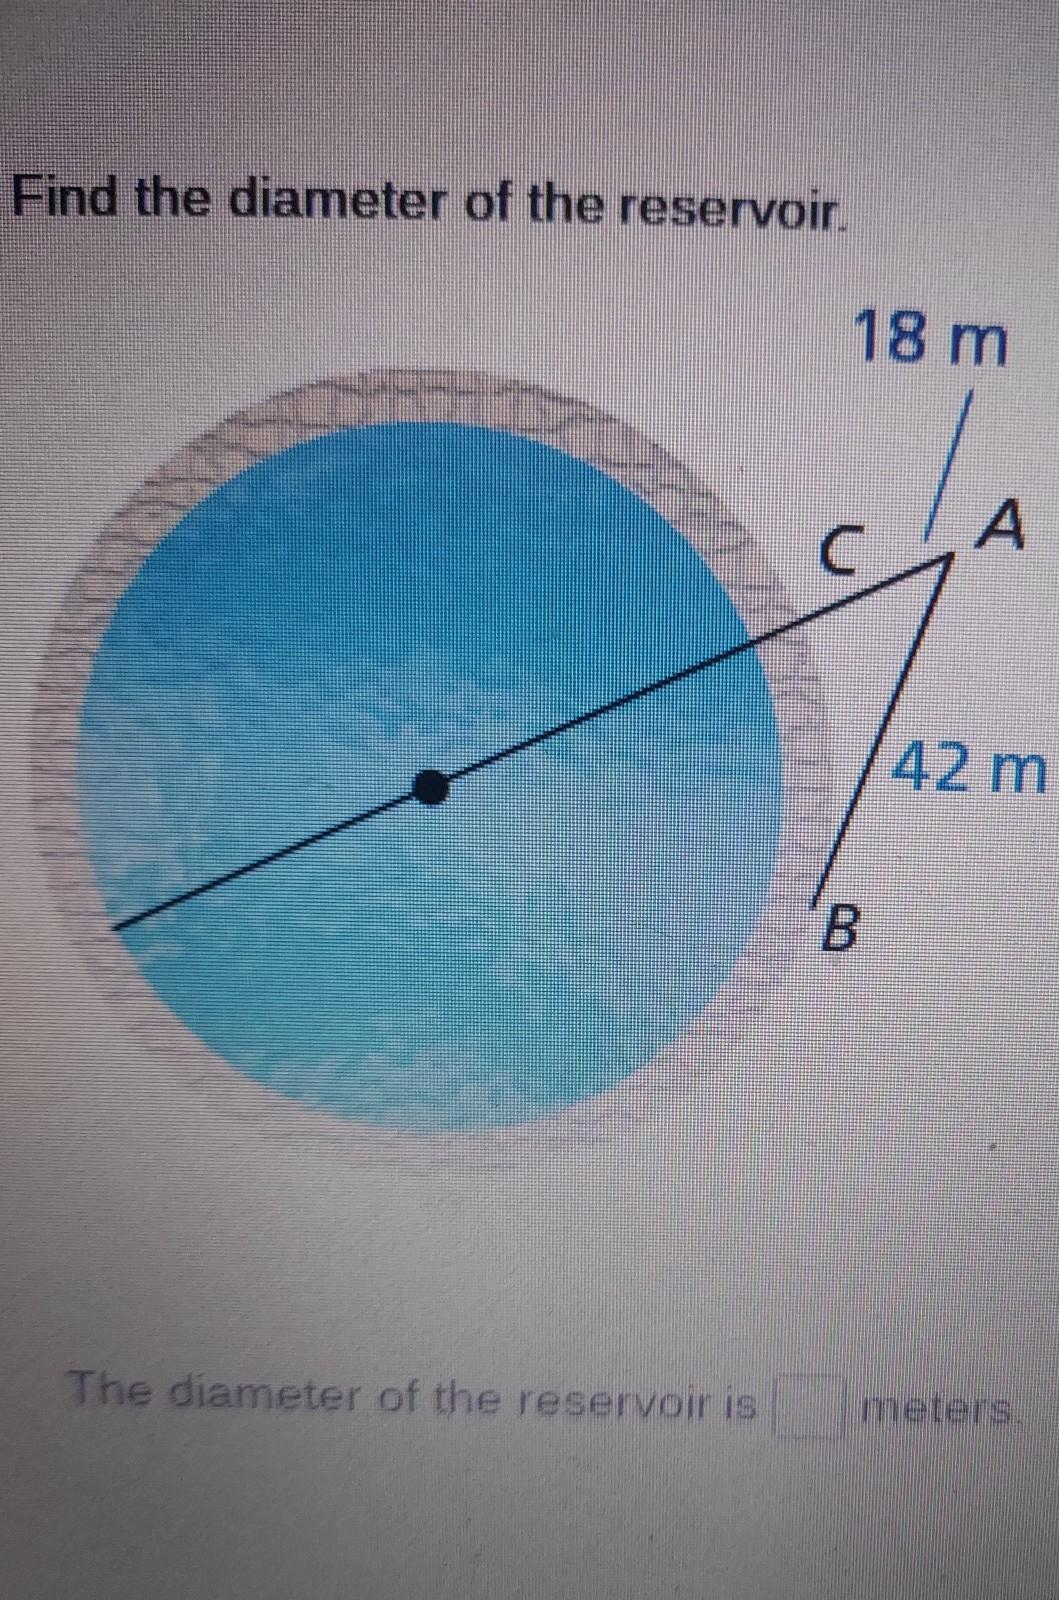 Find The Diameter Of The Reservoir. 18 M A 42 M The Diameter Of The Reservoir Is Meters. 